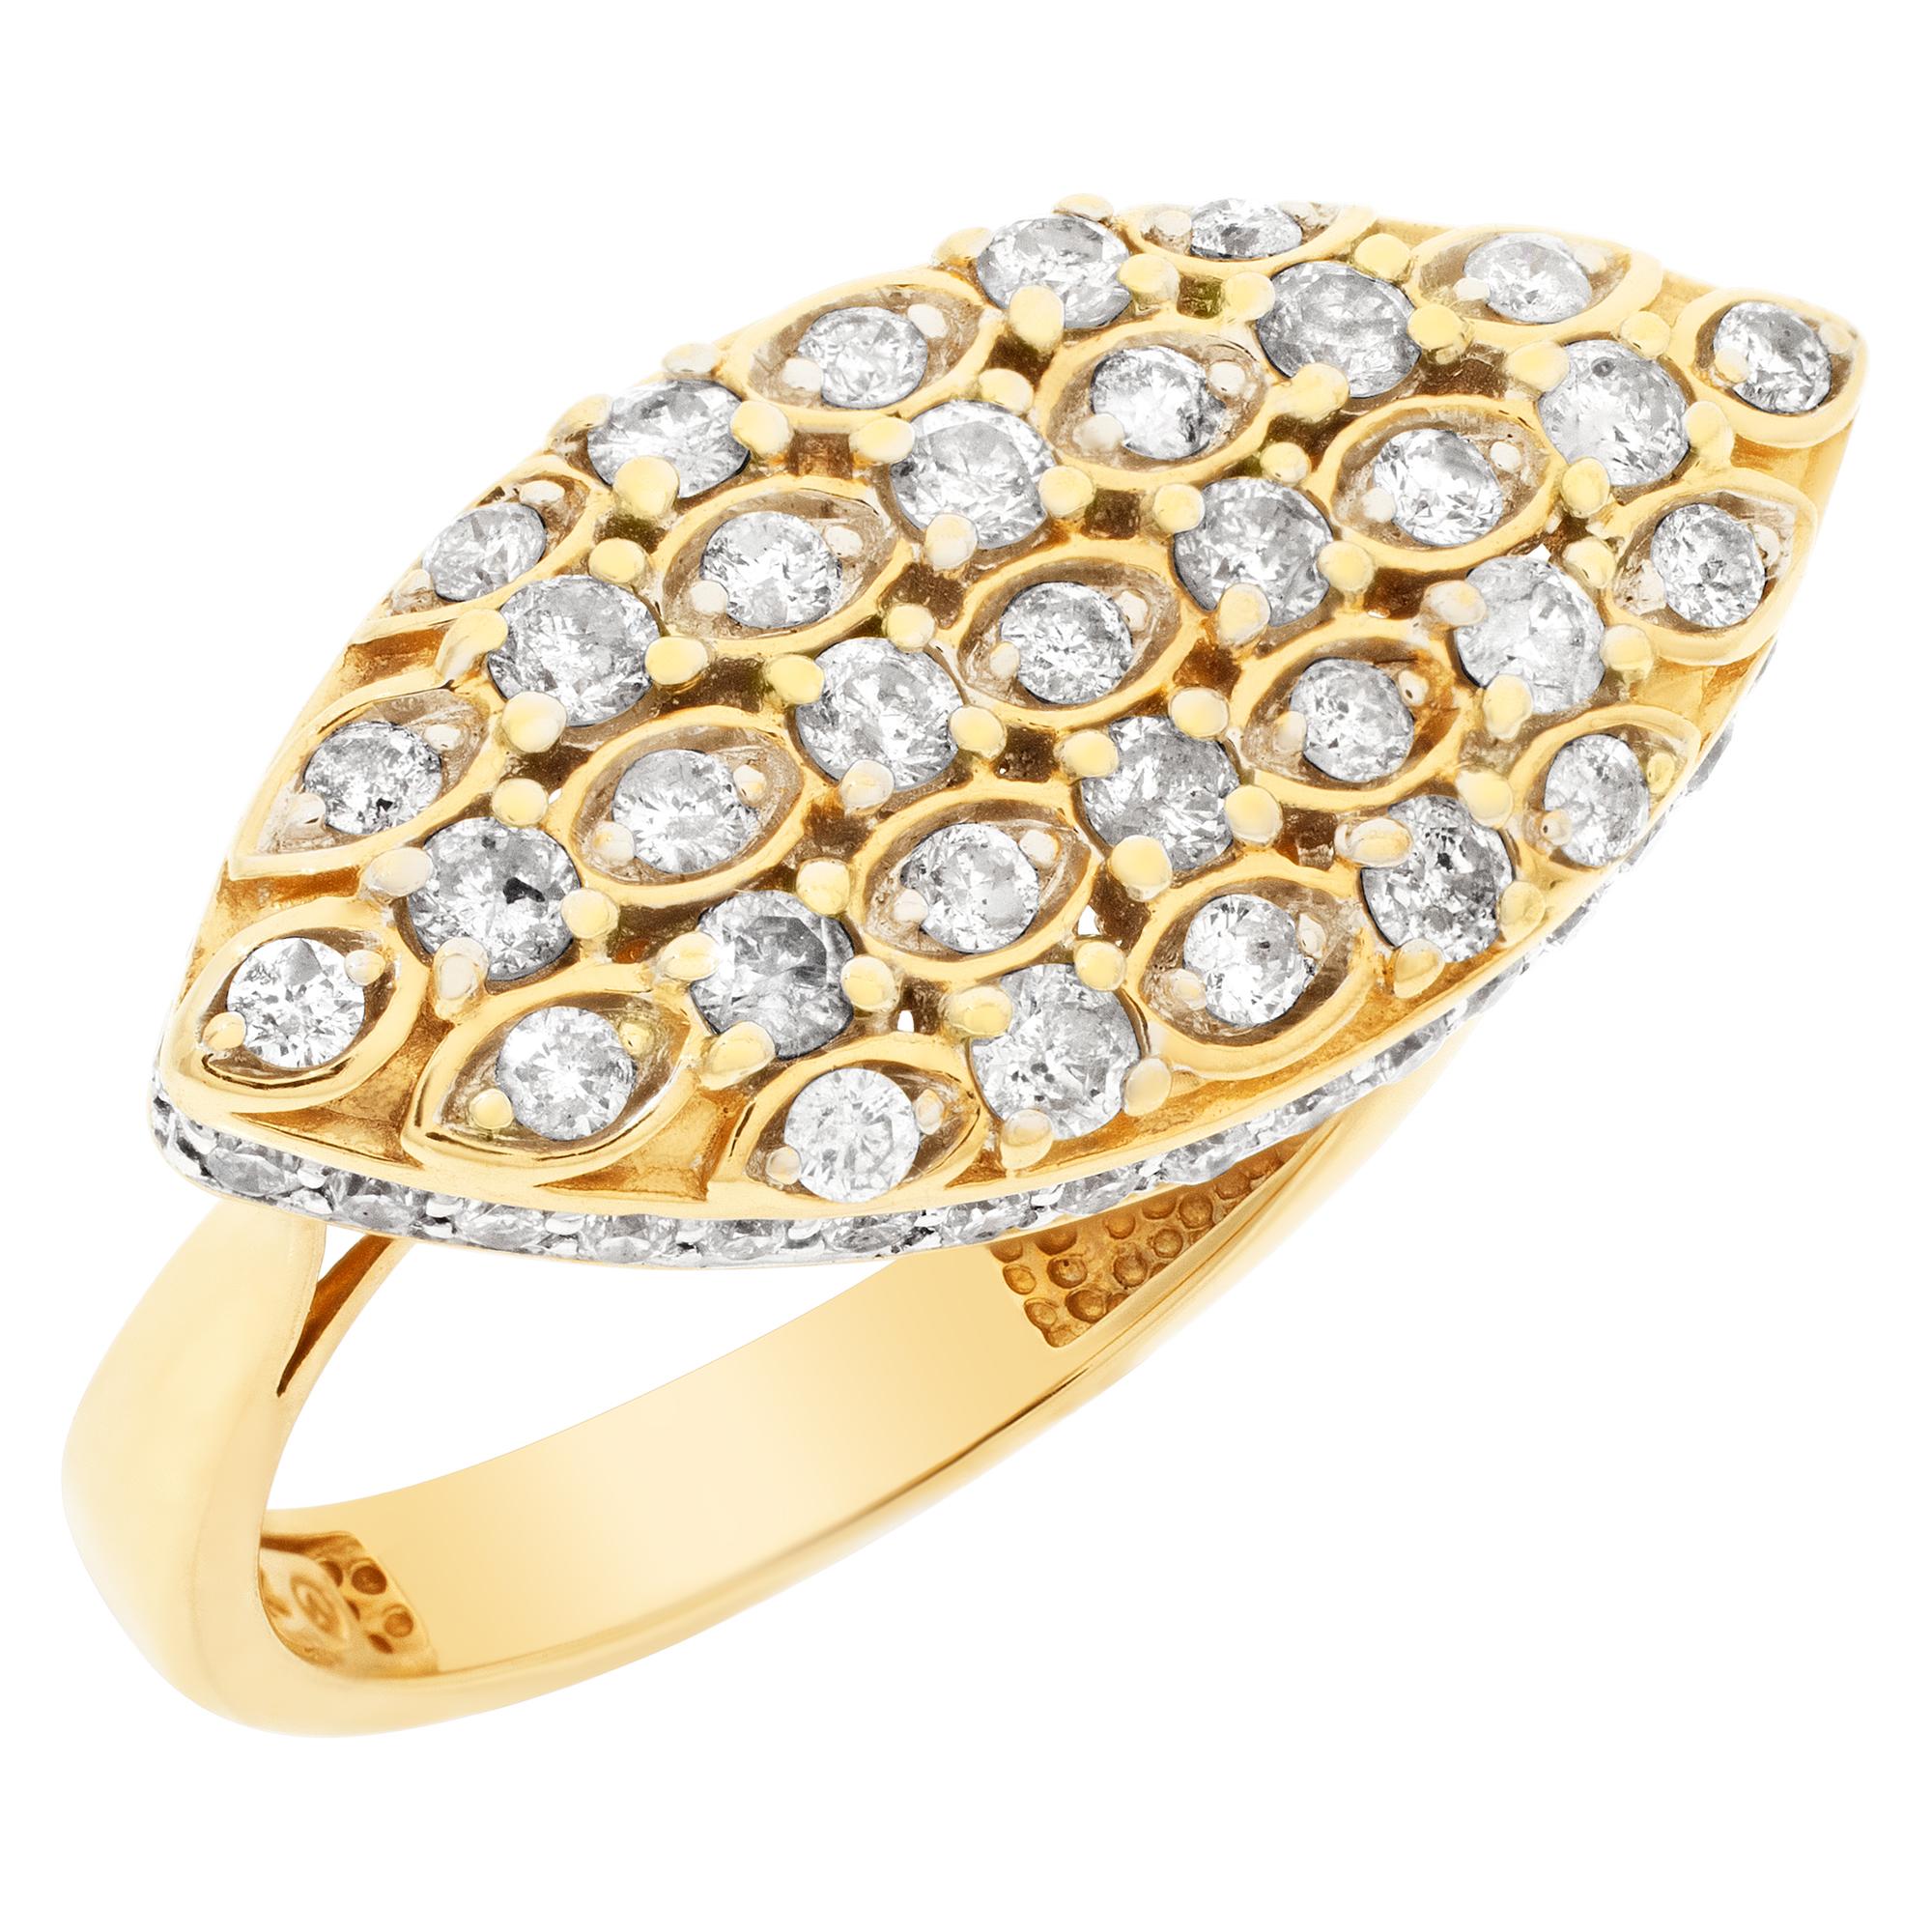 Oval Diamond Ring in 14k Yellow Gold, 0.93 Carats in Pave Set Diamonds In Excellent Condition For Sale In Surfside, FL